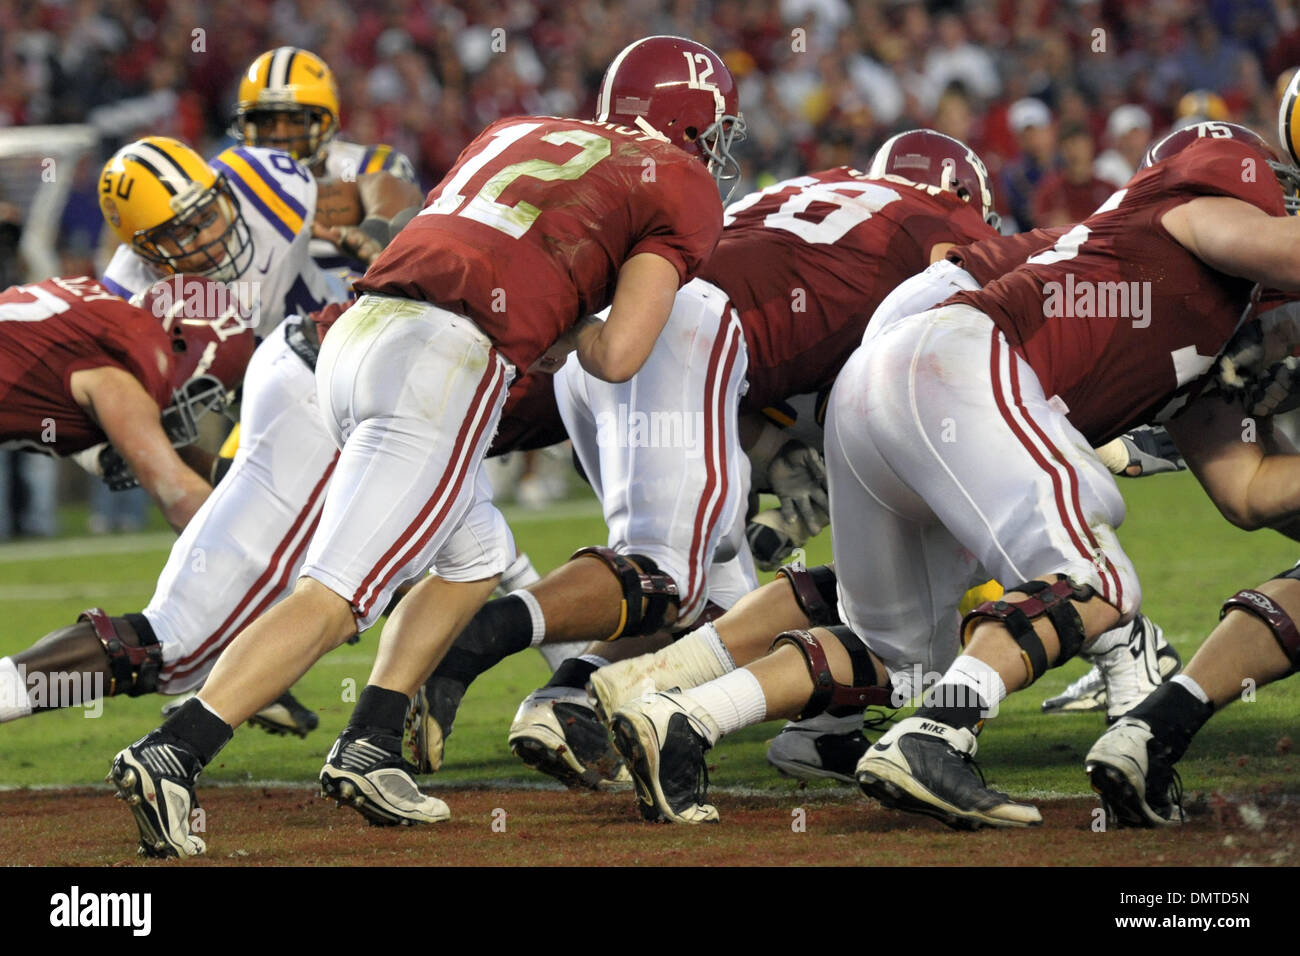 Alabama quarterback, #12 Greg McElroy, on a quarterback keeper during an SEC West matchup between #3 Alabama and #9 LSU.  The game is being held in Bryant .Denny Stadium in Tuscaloosa, Alabama.  Alabama would win the game 24-15. (Credit Image: © Stacy Revere/Southcreek Global/ZUMApress.com) Stock Photo